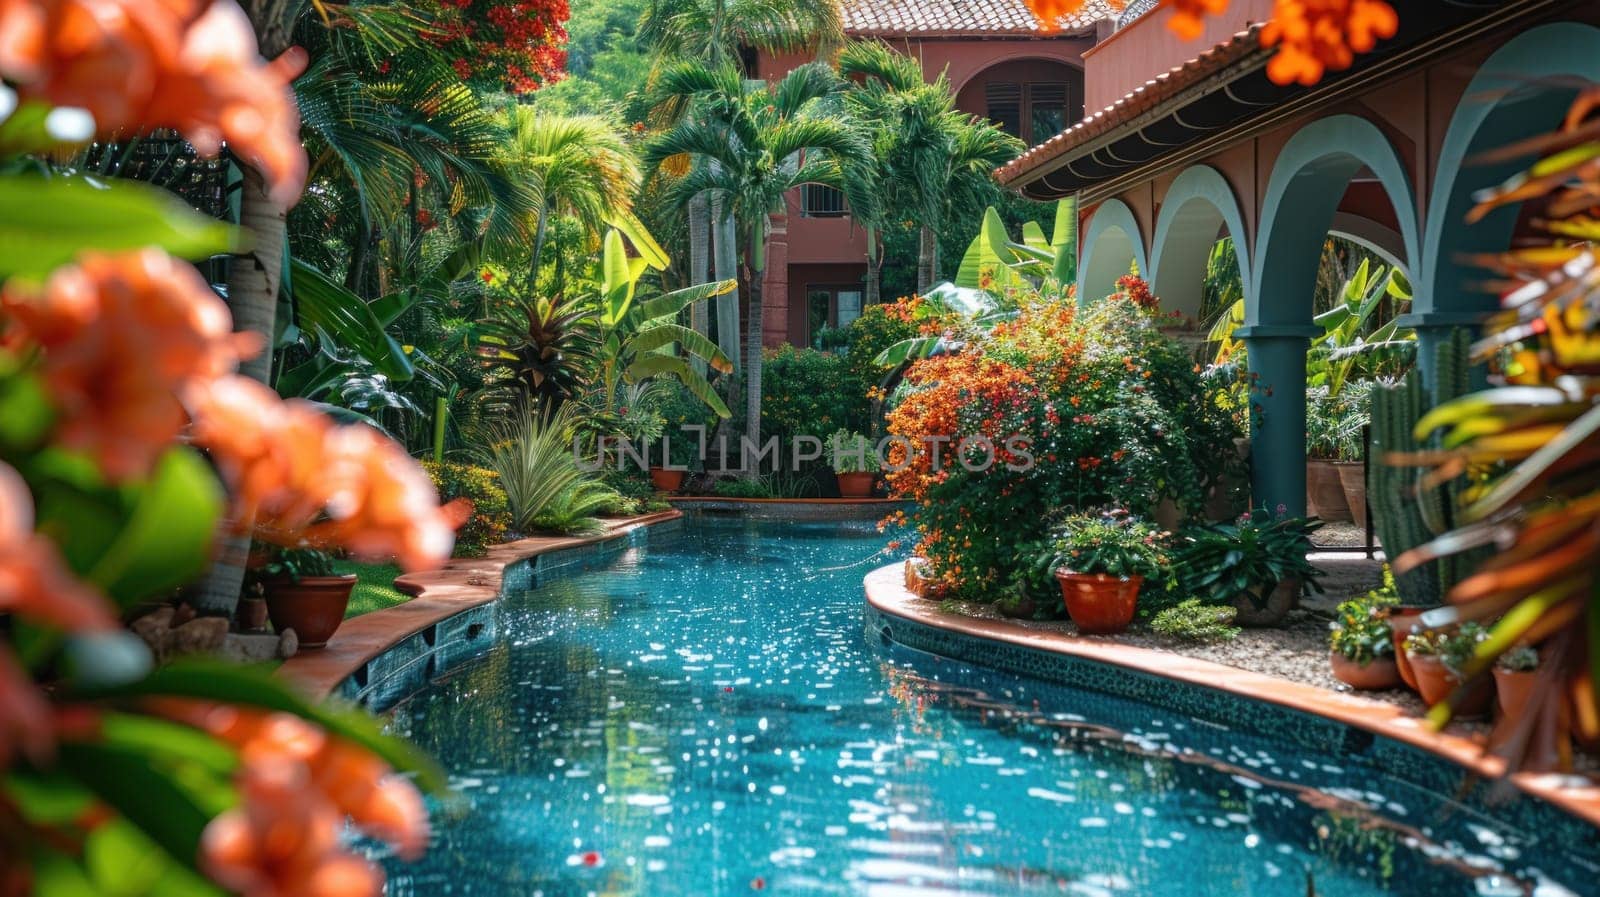 Luxury Resort Garden Filled with Exotic Flowers Concept Tranquil and Beautiful Setting for Perfect Summer Vacation.